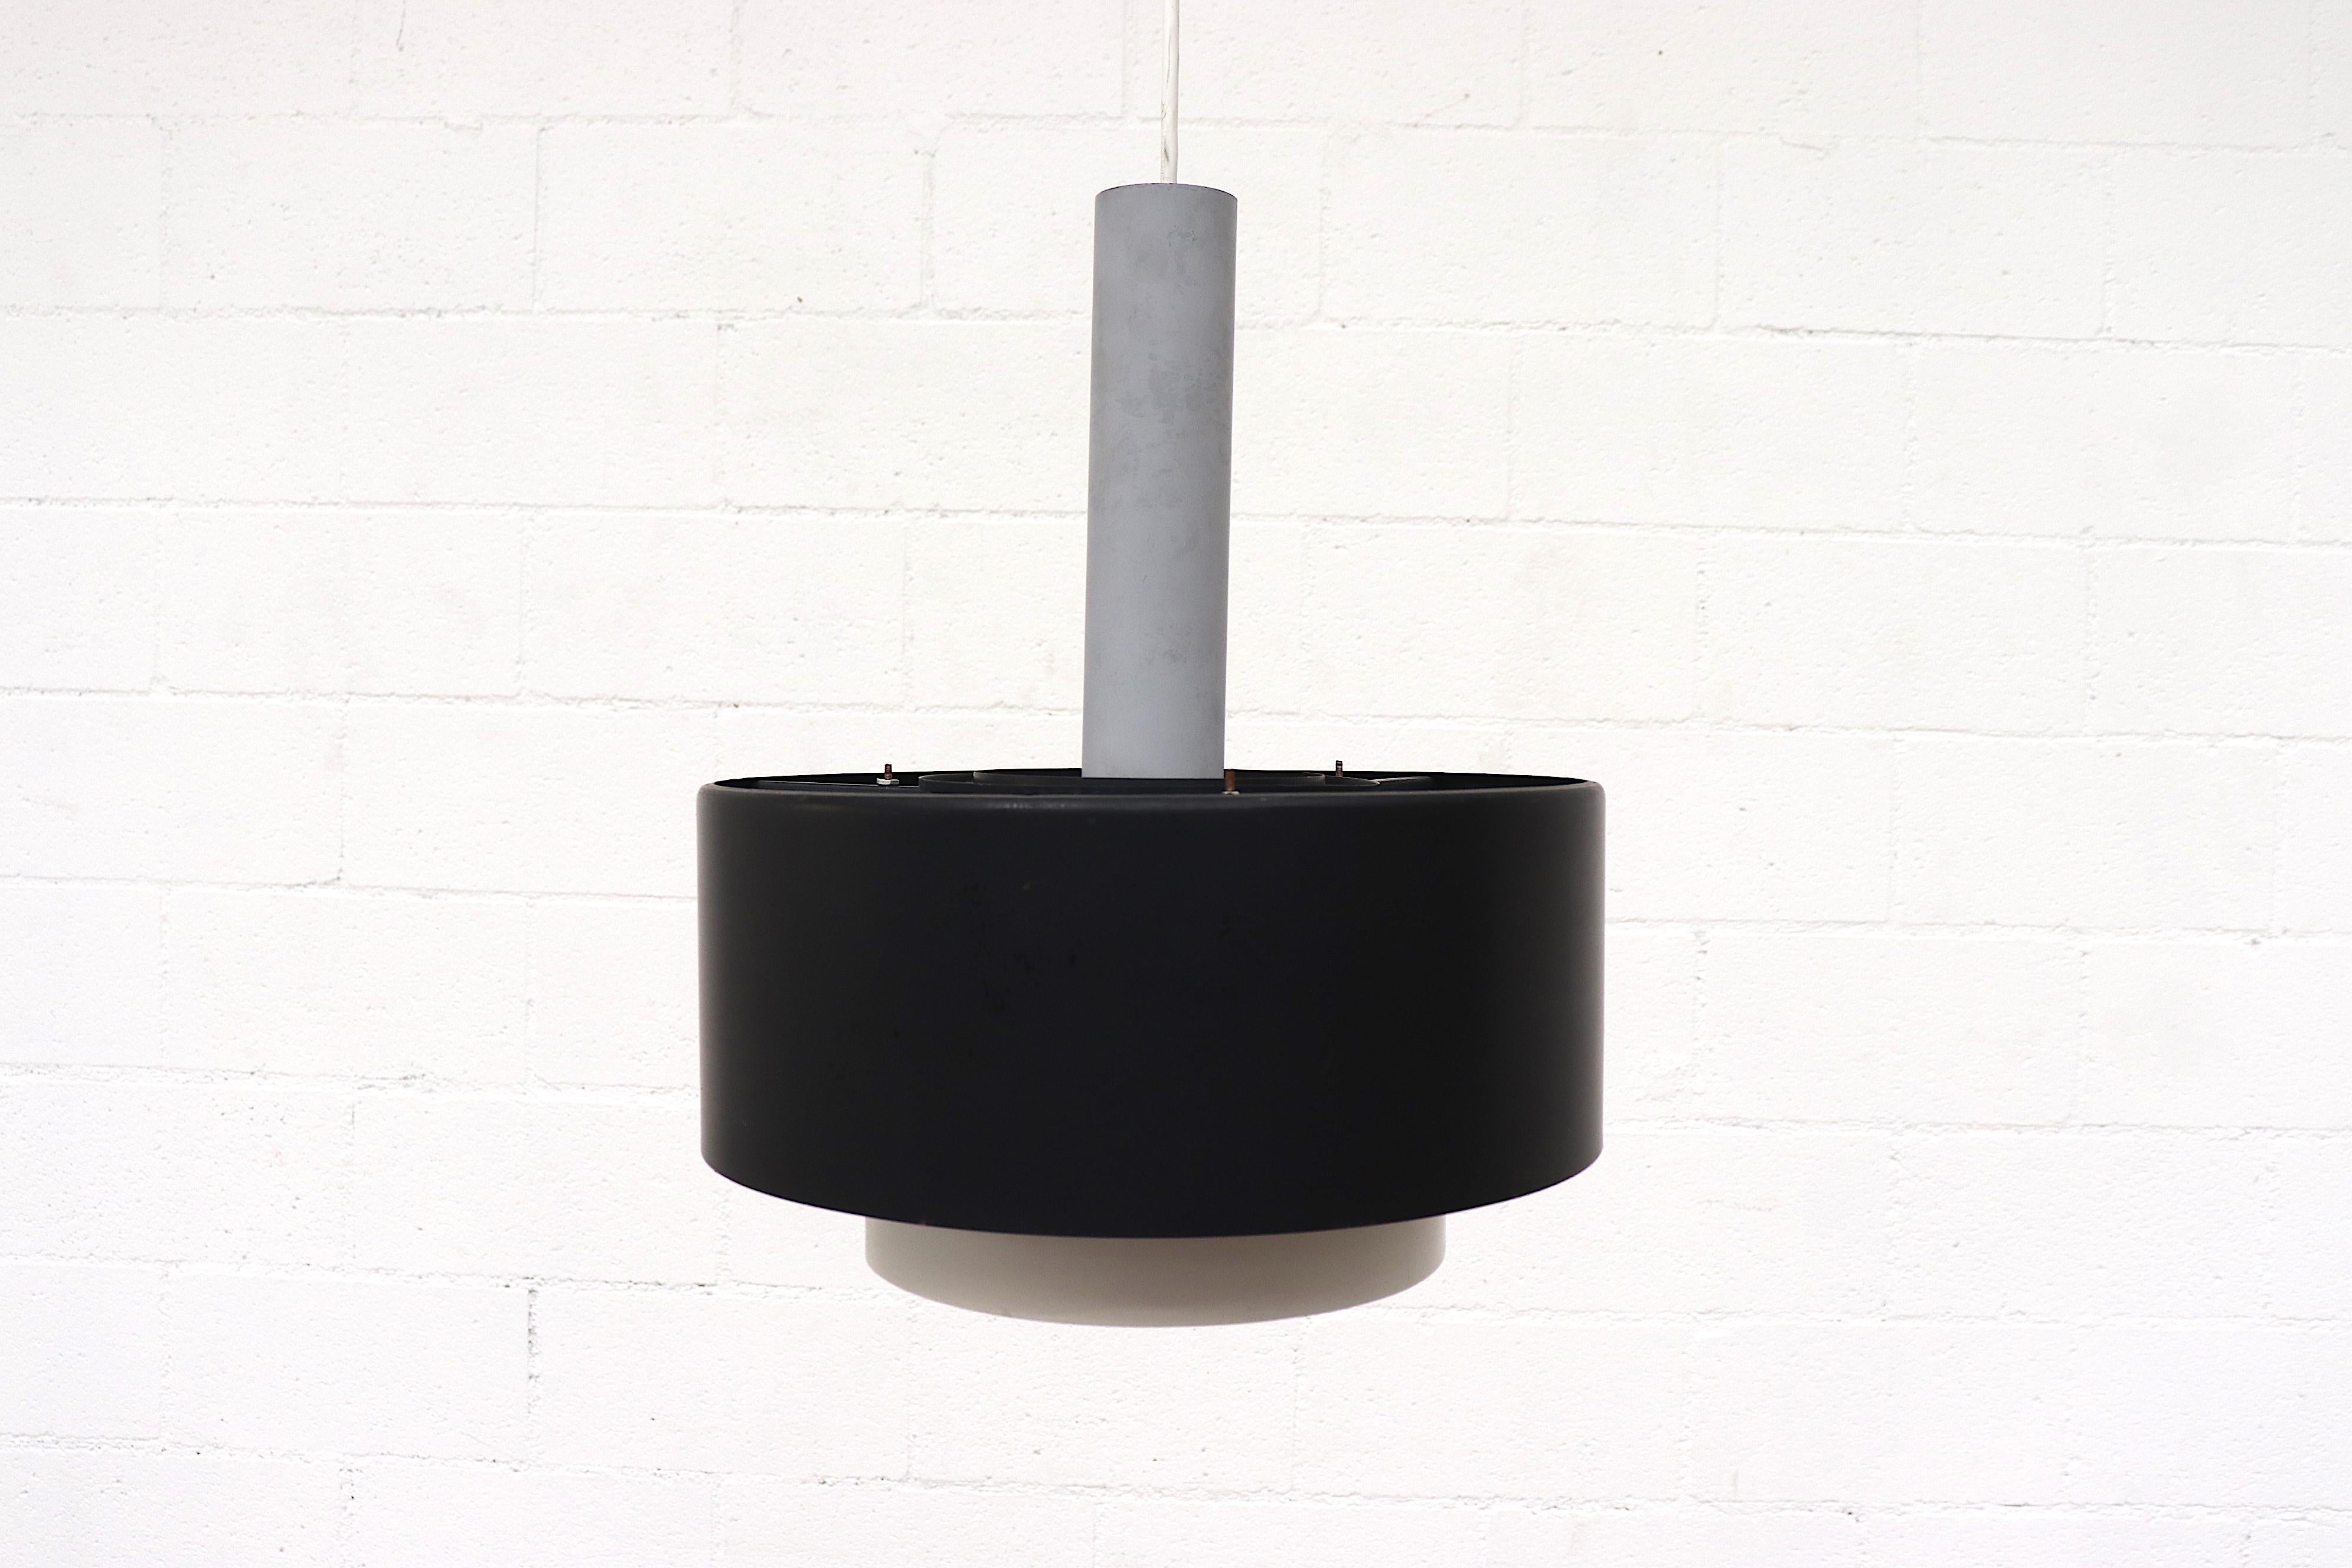 Midcentury industrial ceiling pendant with black and white enameled shade on tubular grey metal hardware with standard light socket. In original condition with wear and scratching consistent with age ad use. Individually priced.